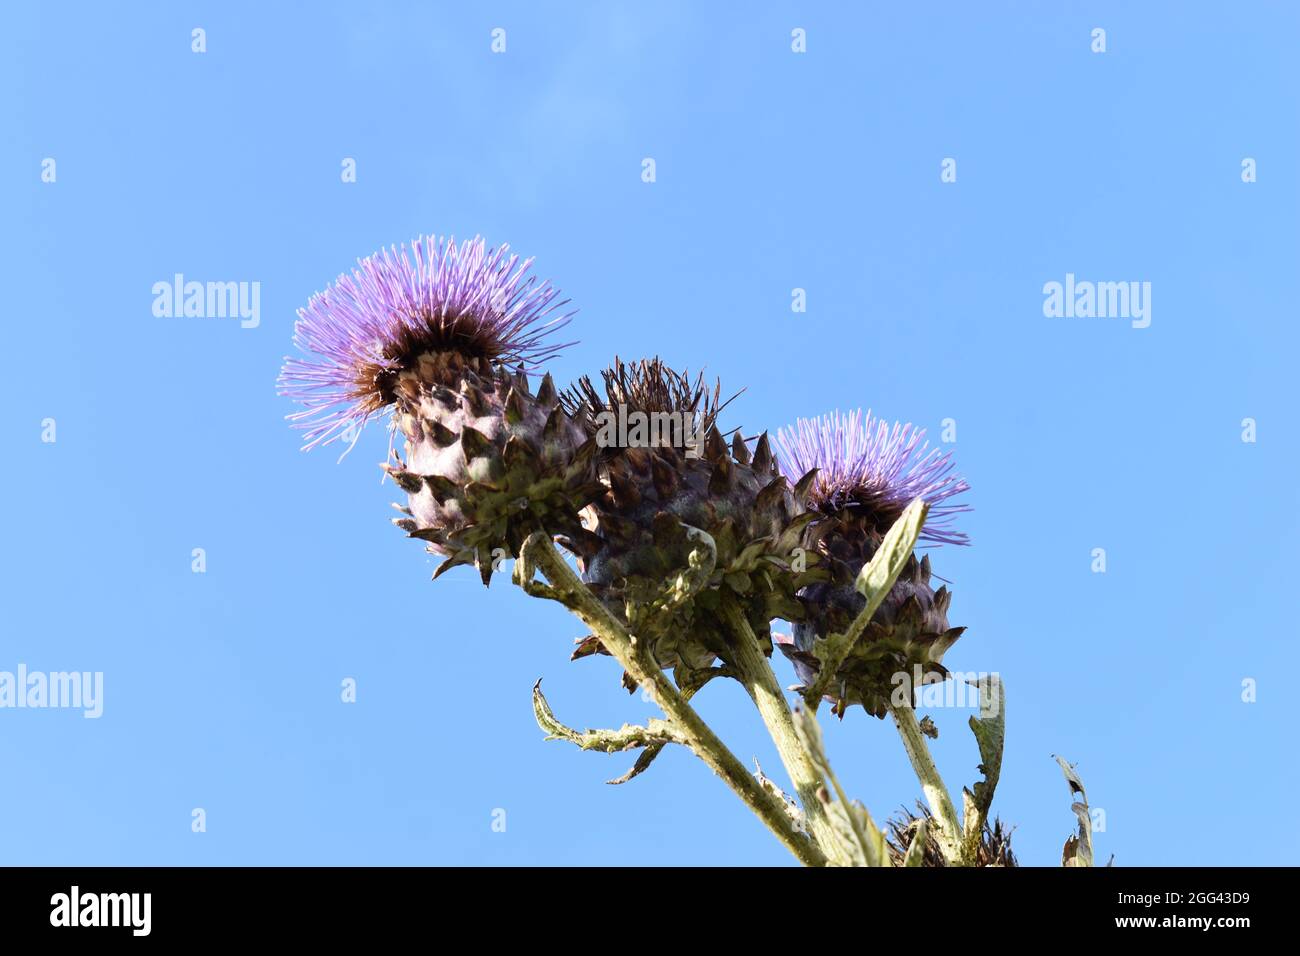 Purple thistles (Asteraceae) against a blue sky with copyspace. Stock Photo